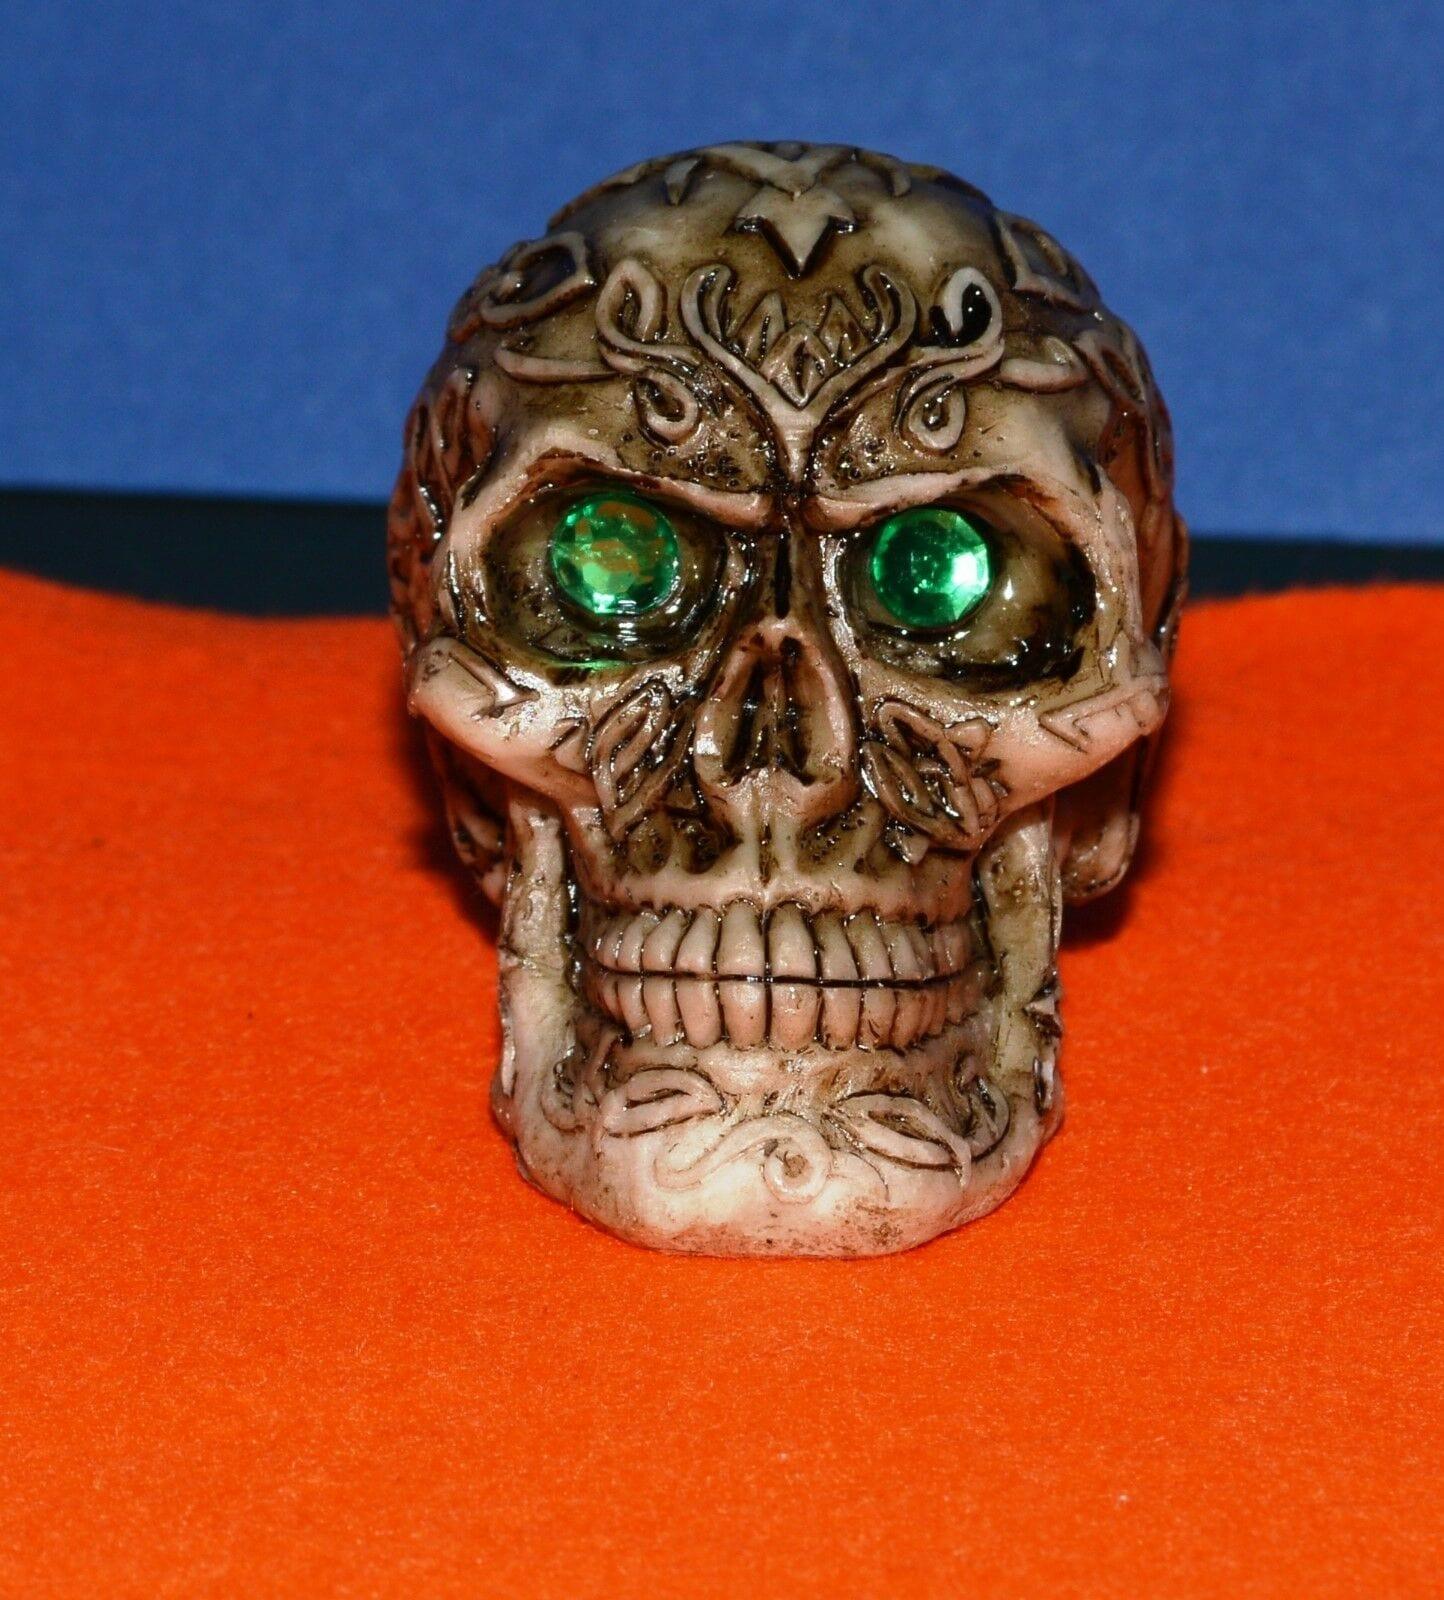 NEW DECORATIVE ORNAMENT 3 MINIATURE SKULLS WITH EMBOSSED CELTIC PATTERN AND FAKE GEMSTONE EYES - TMD167207